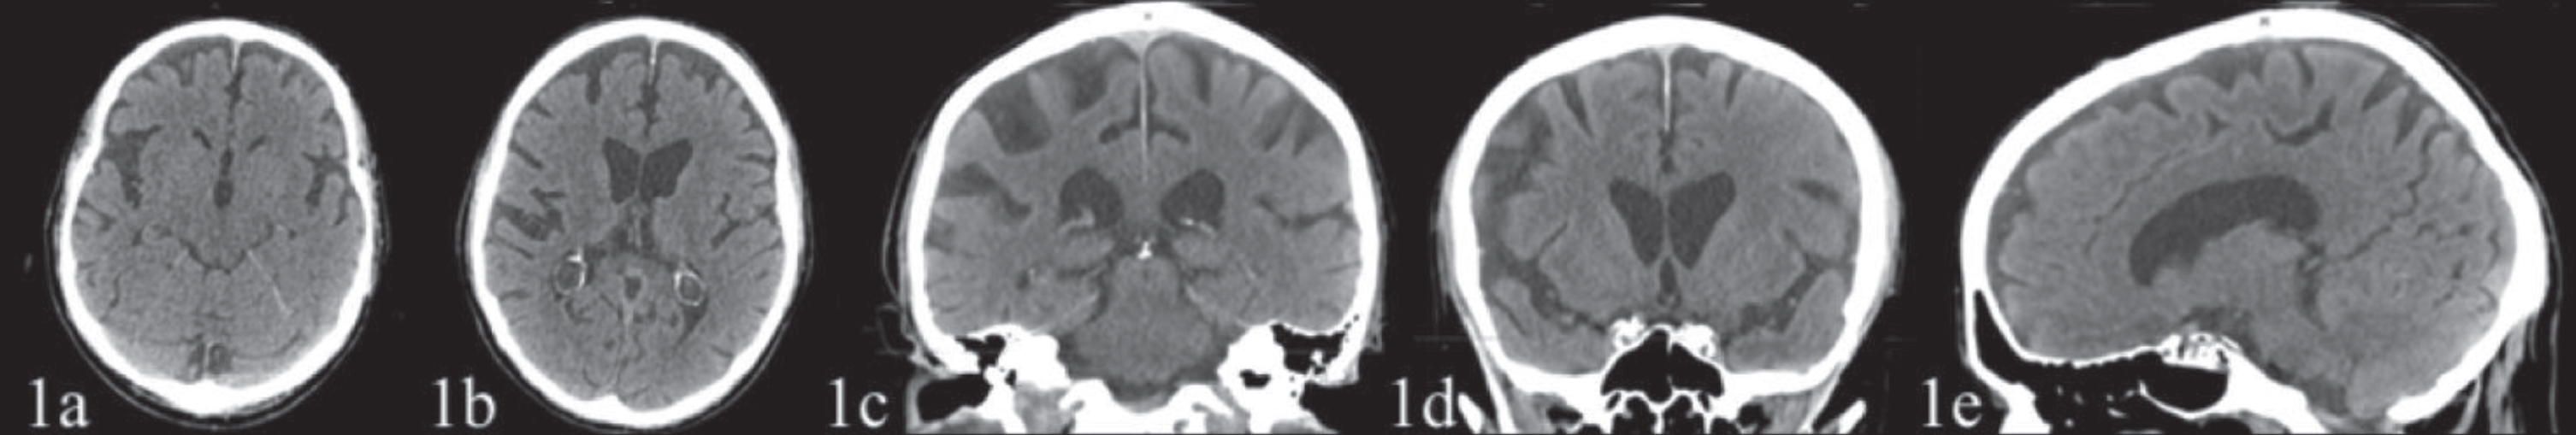 CT scan (February 17, 2018), with no contrast, showing a posterior parietal (1c, 1d) and temporal cortical atrophy (1a) prevalent on the right hemisphere and a moderate atrophy of the precuneus (1e) and frontal cortex (1a, 1b). The hippocampus and the mesial temporal area appeared fairly preserved.